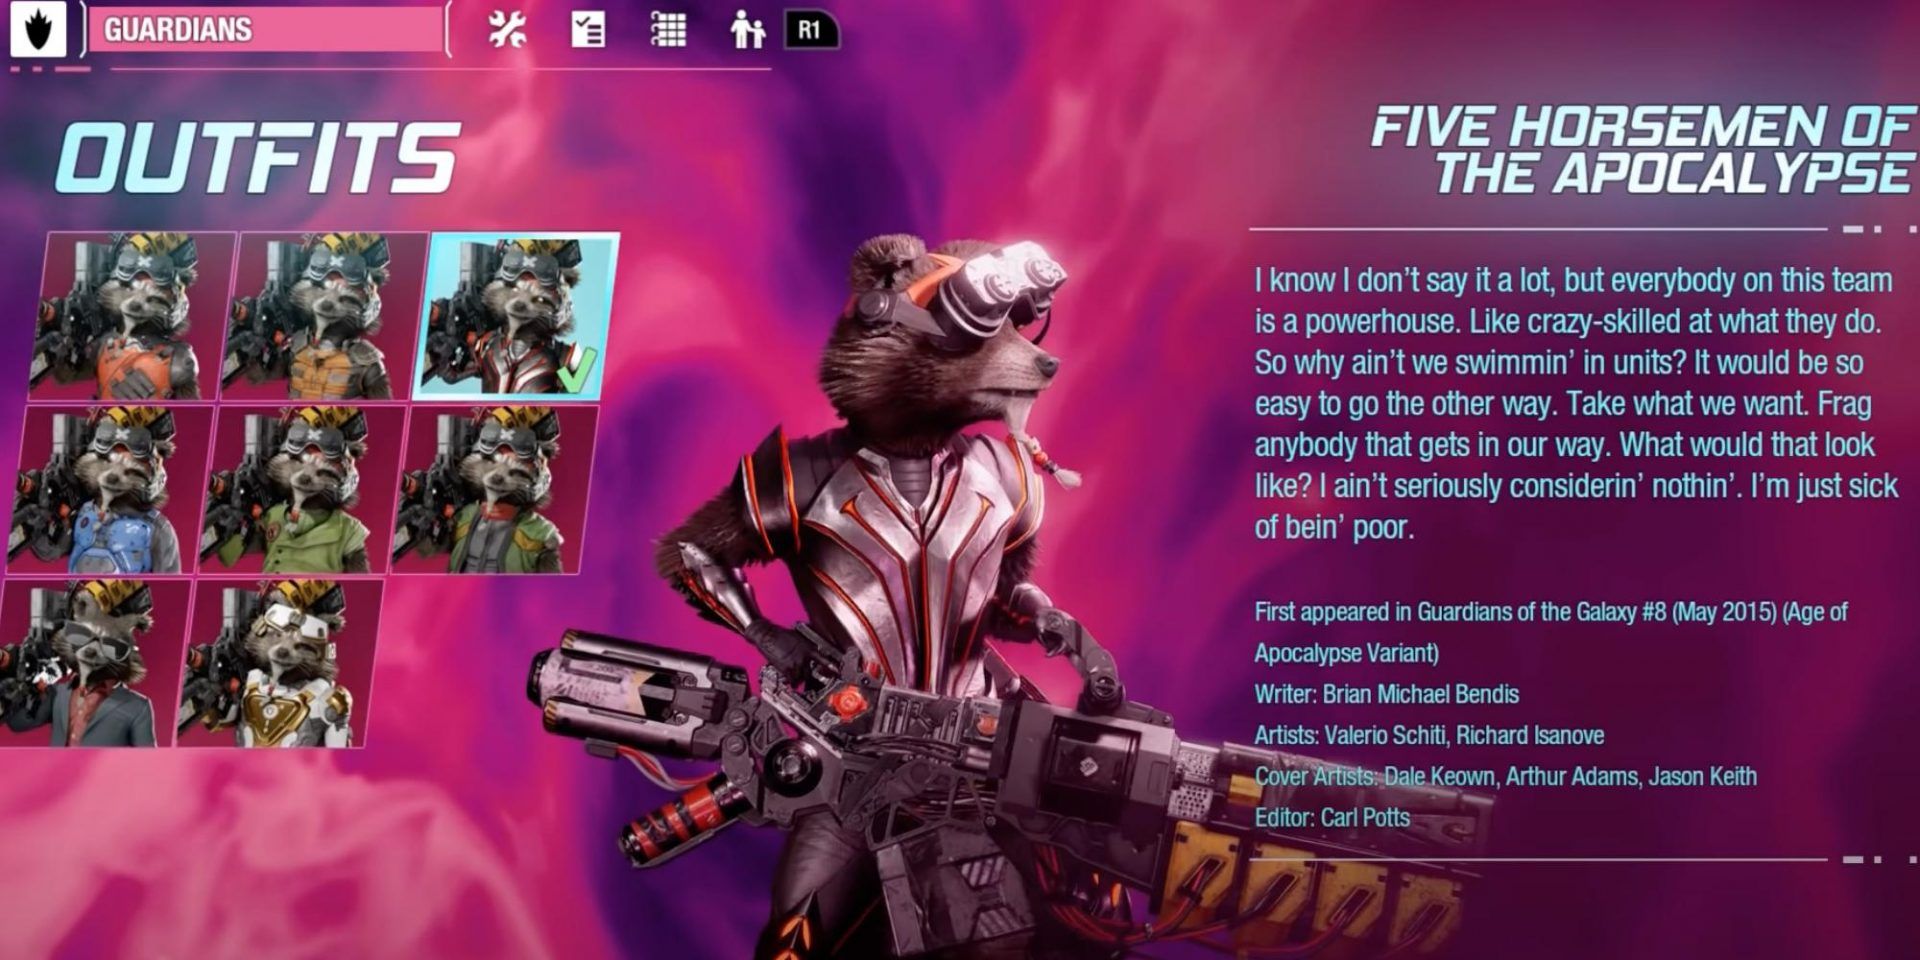 Marvel's Guardians of the Galaxy Rocket Apocalypse Horsemen Outfit